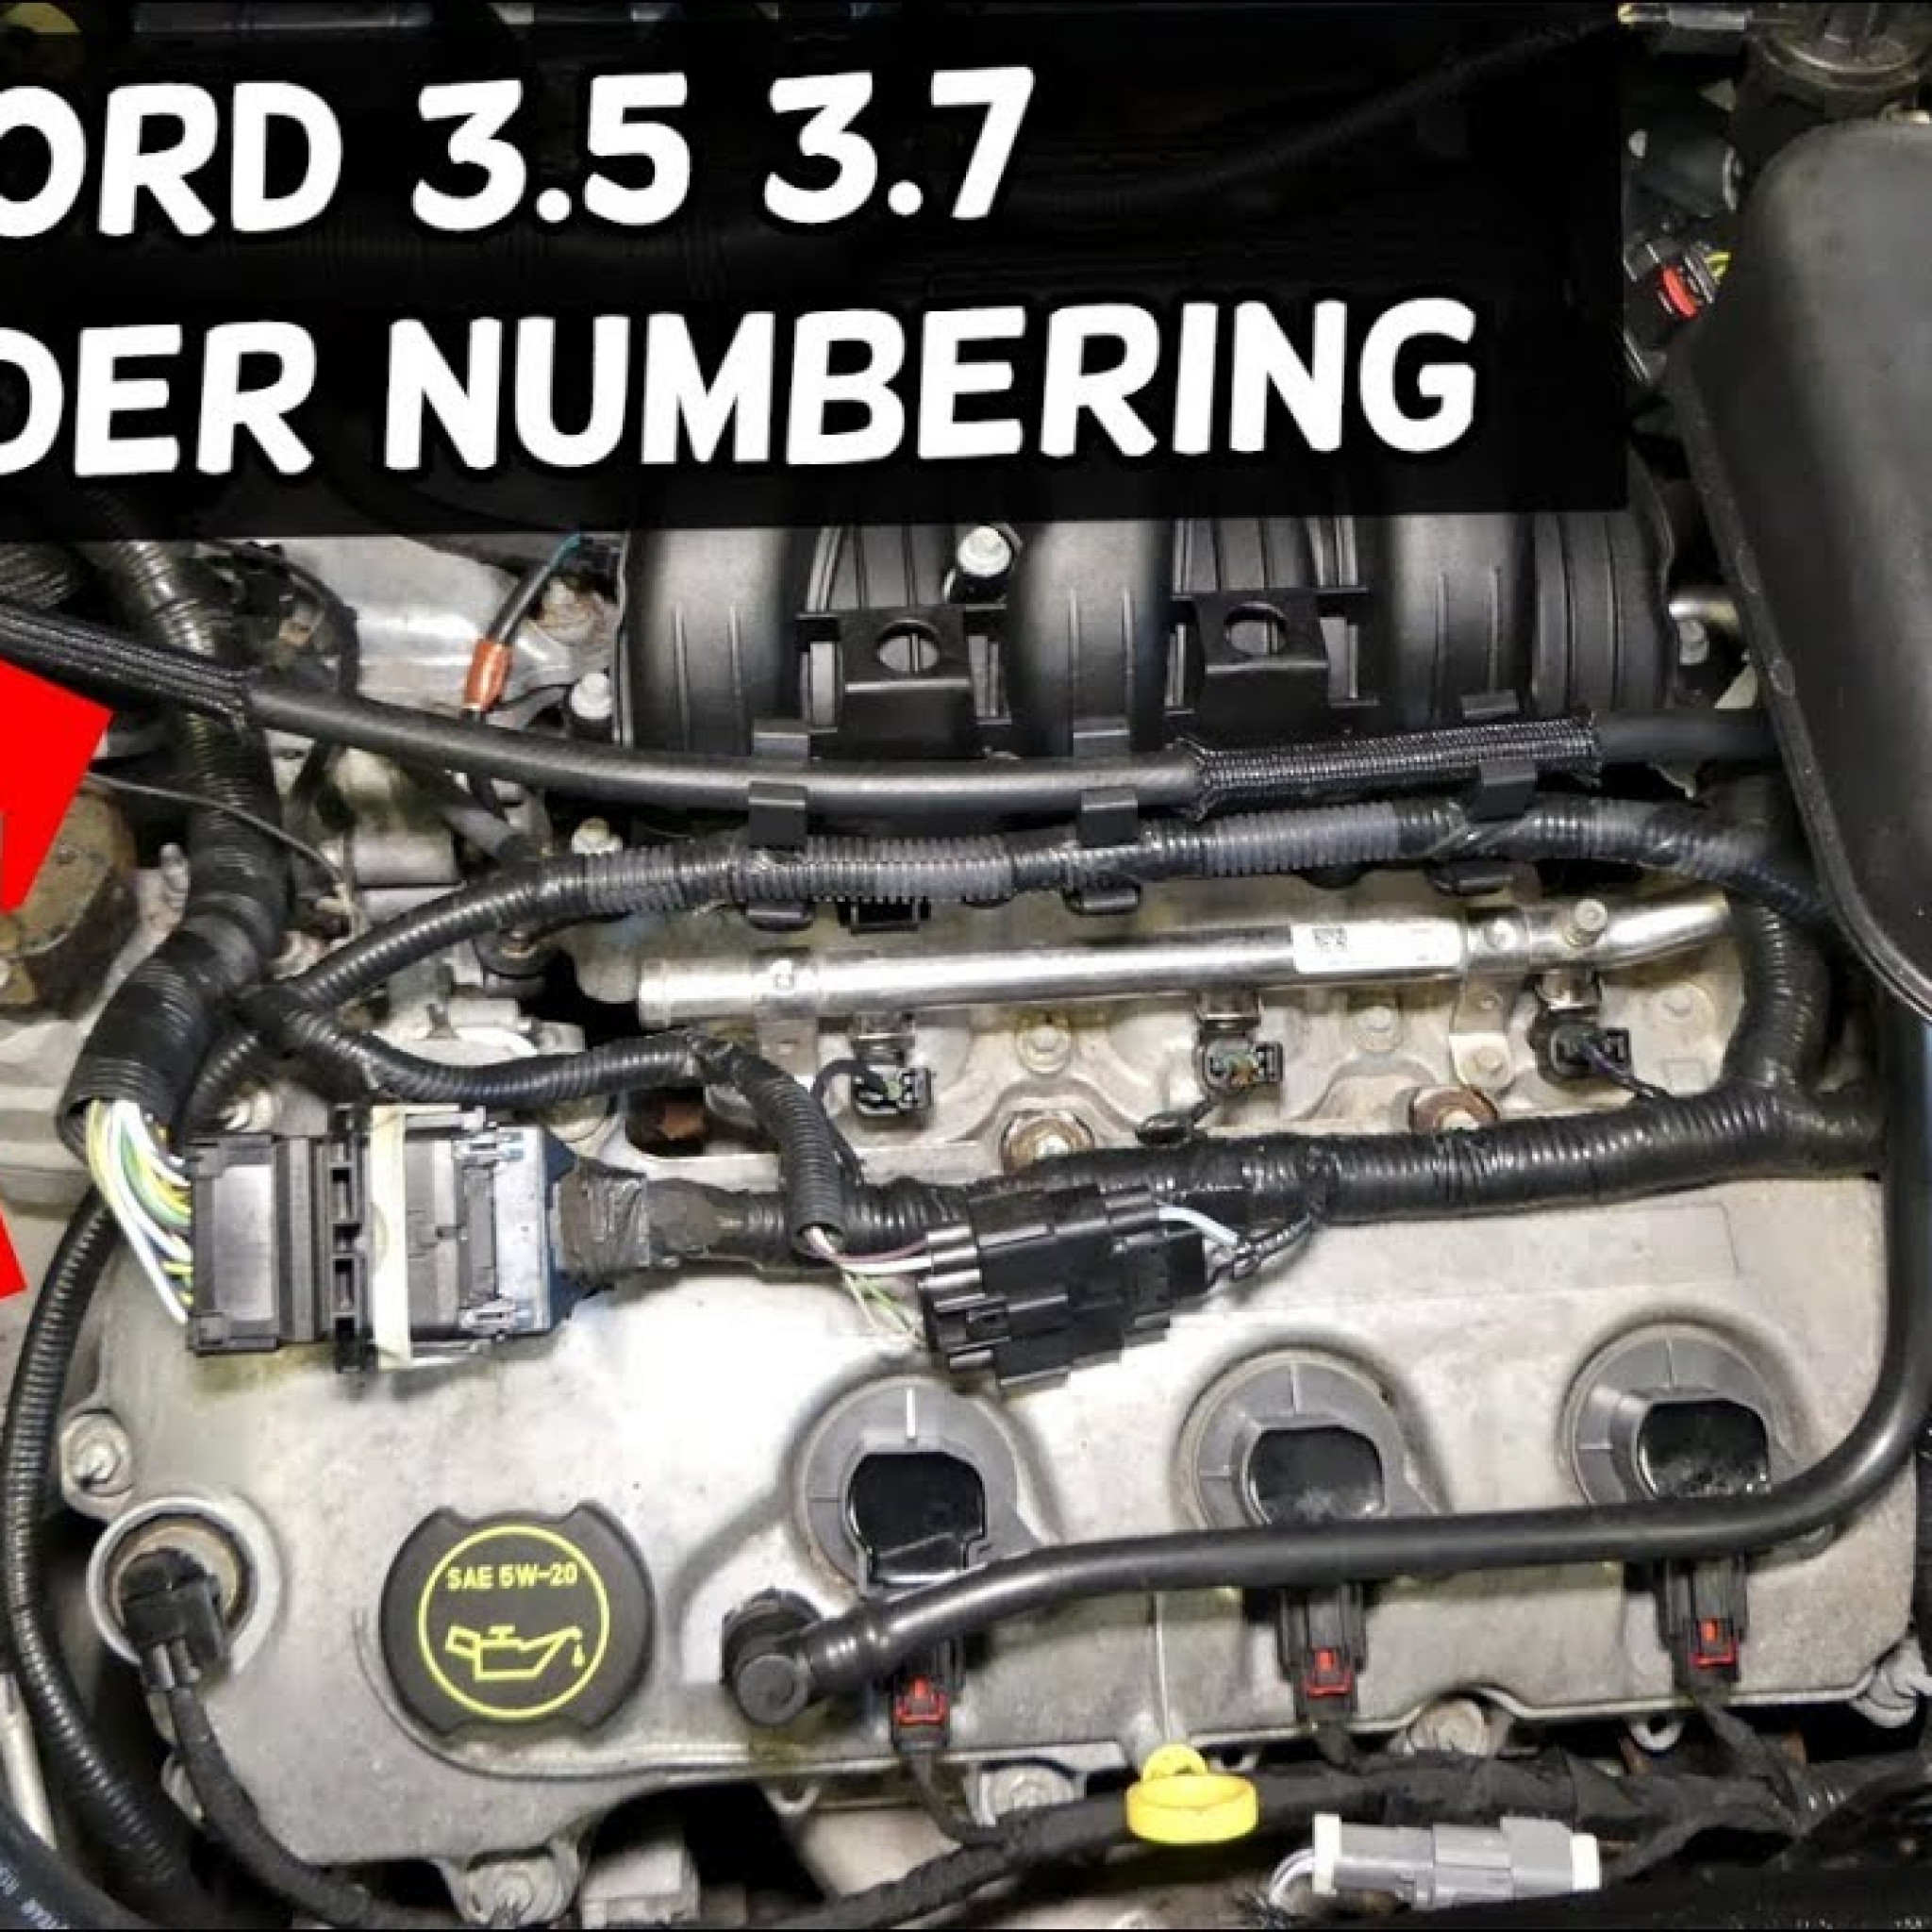 2013 Ford Taurus 3.5 Firing Order | Wiring and Printable